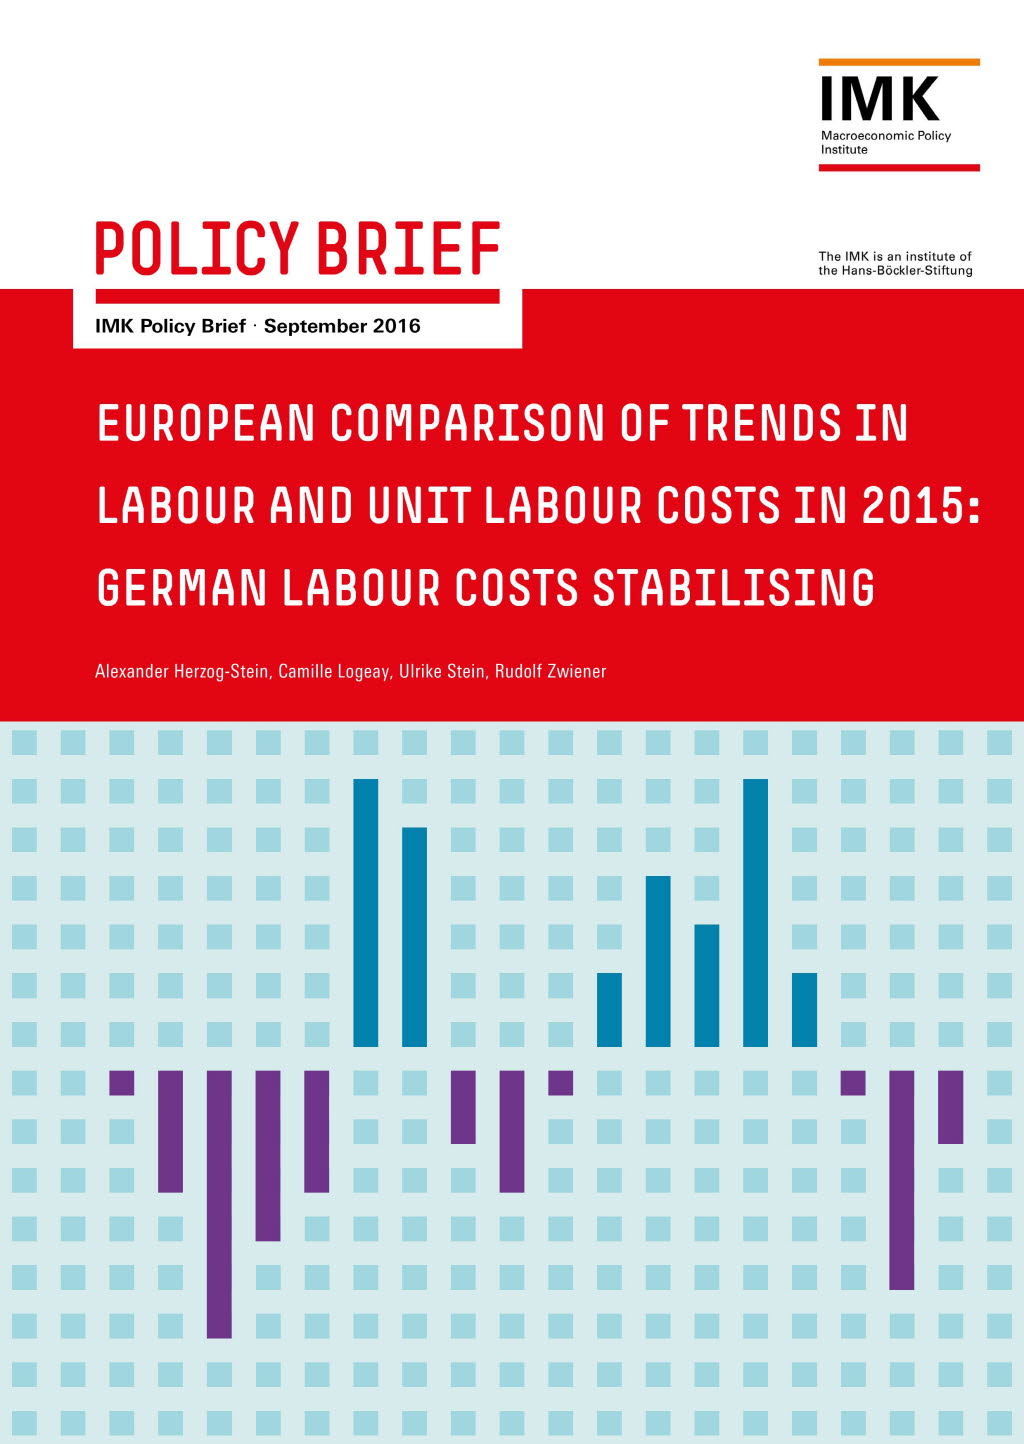 European comparison of trends in labour and unit labour costs in 2015